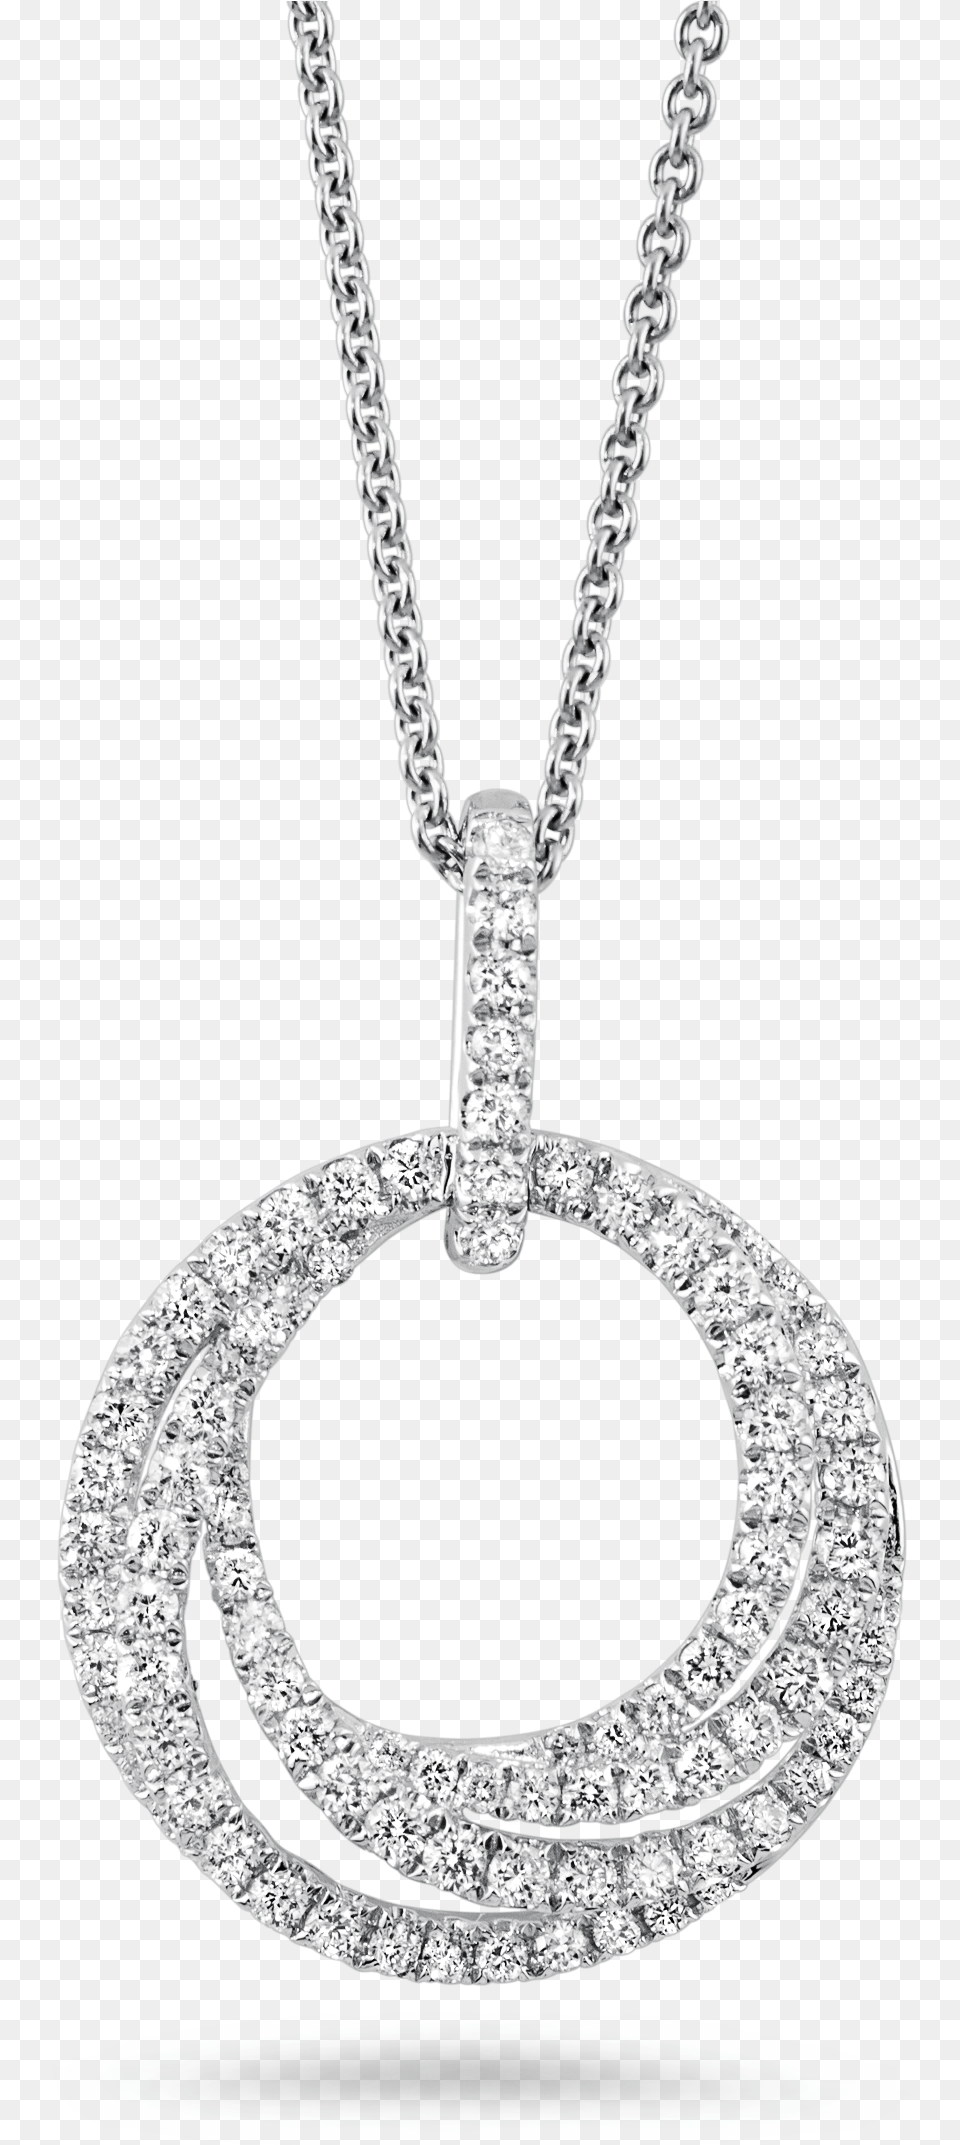 Diamond Necklace Life Of Circle Jewellery, Accessories, Gemstone, Jewelry, Pendant Png Image